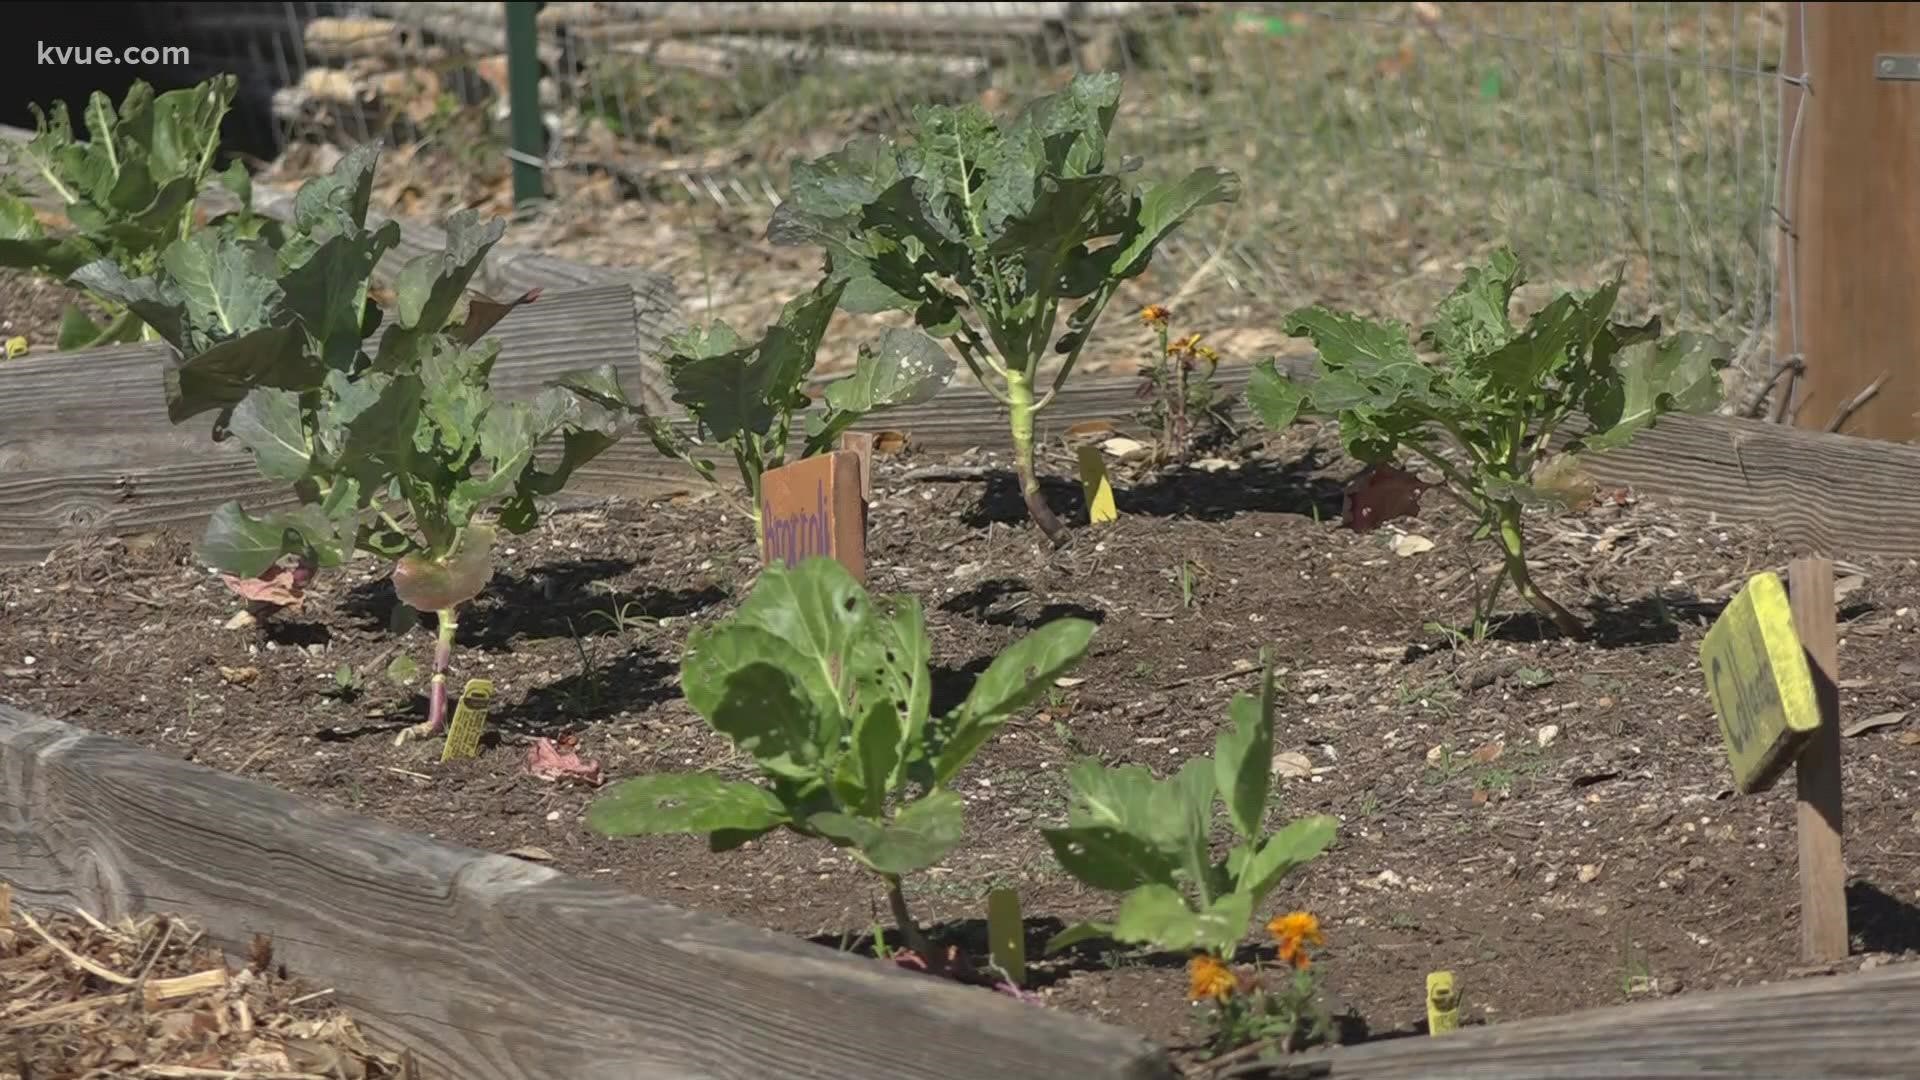 The group teaches students how to grow plants, fruits and vegetables and to give back to their fellow students and surrounding community.